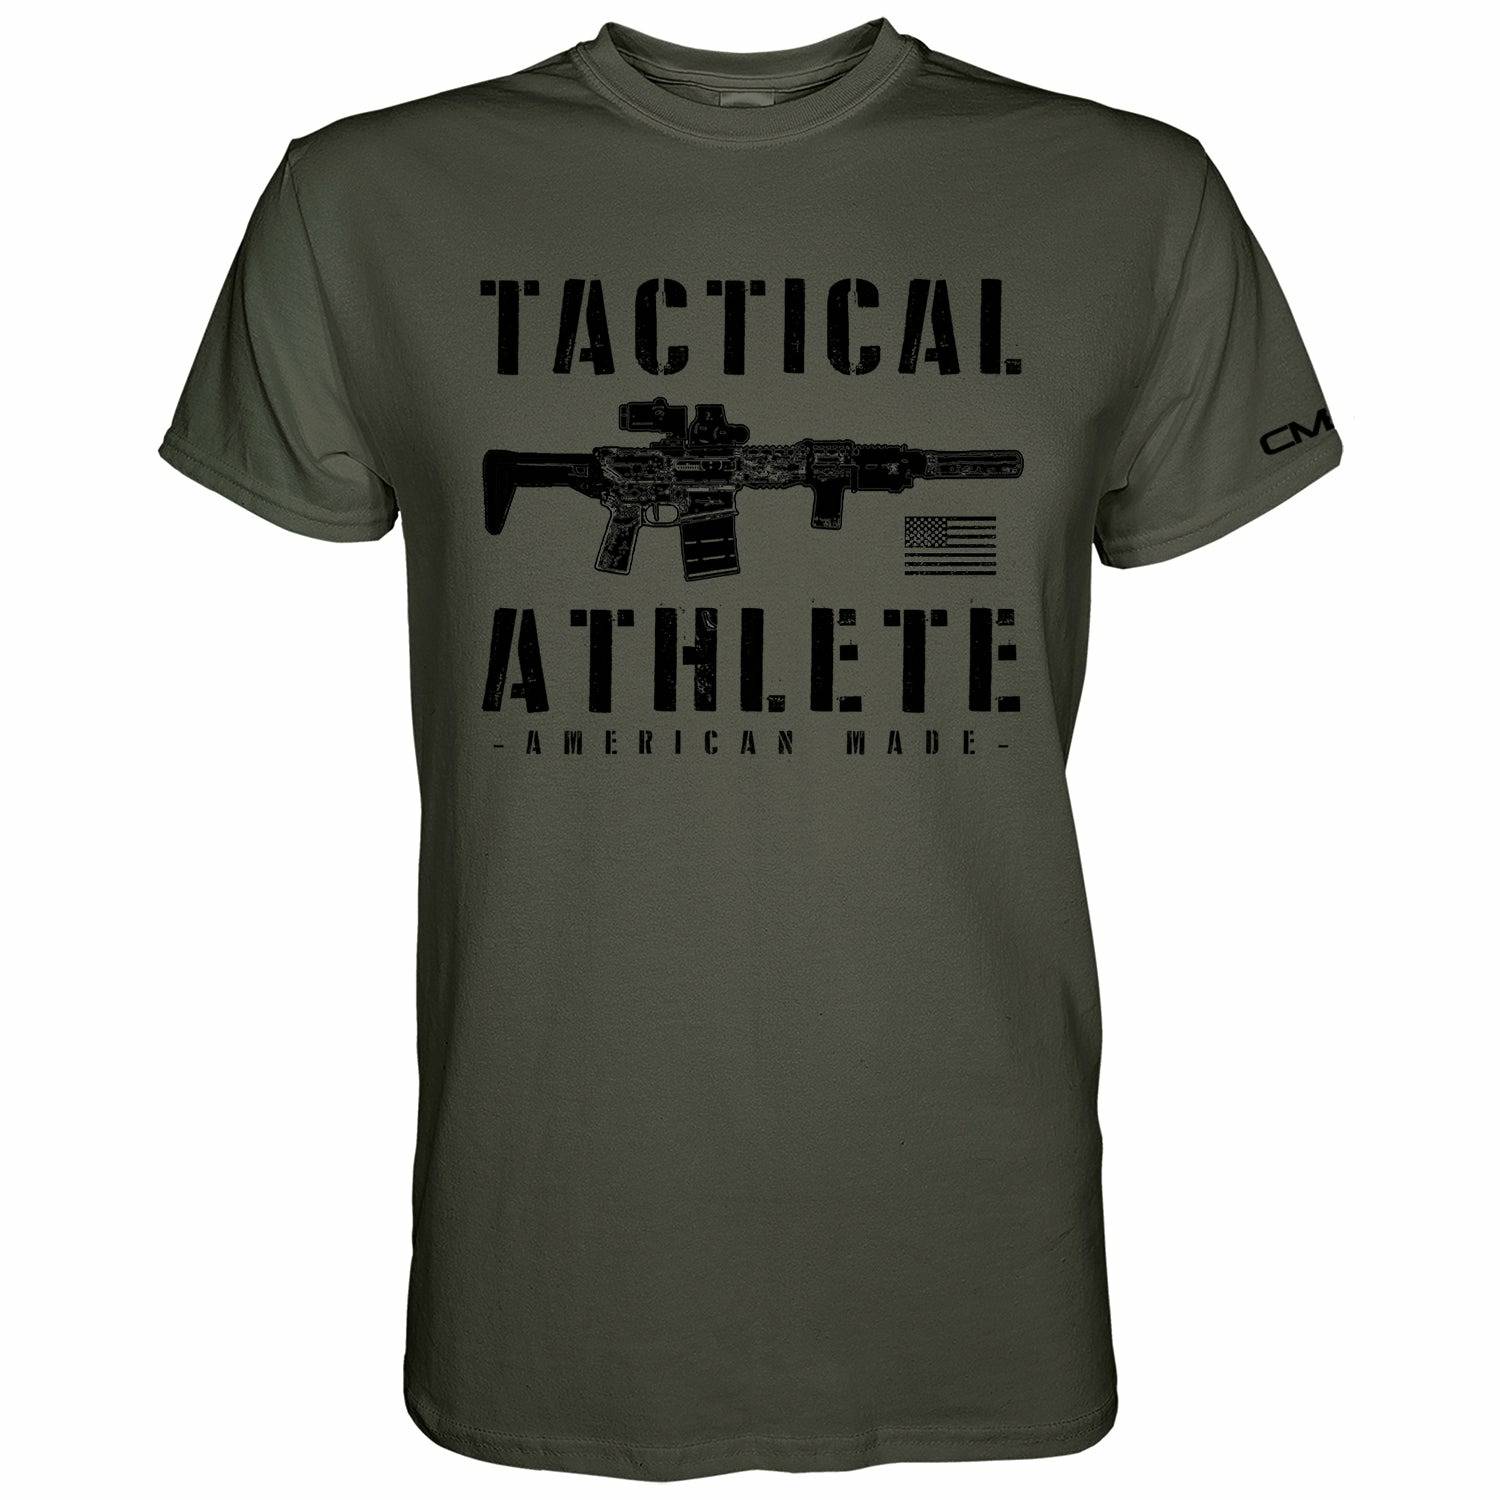 TACTICAL ATHLETE AMERICAN-MADE MEN’S T-SHIRT